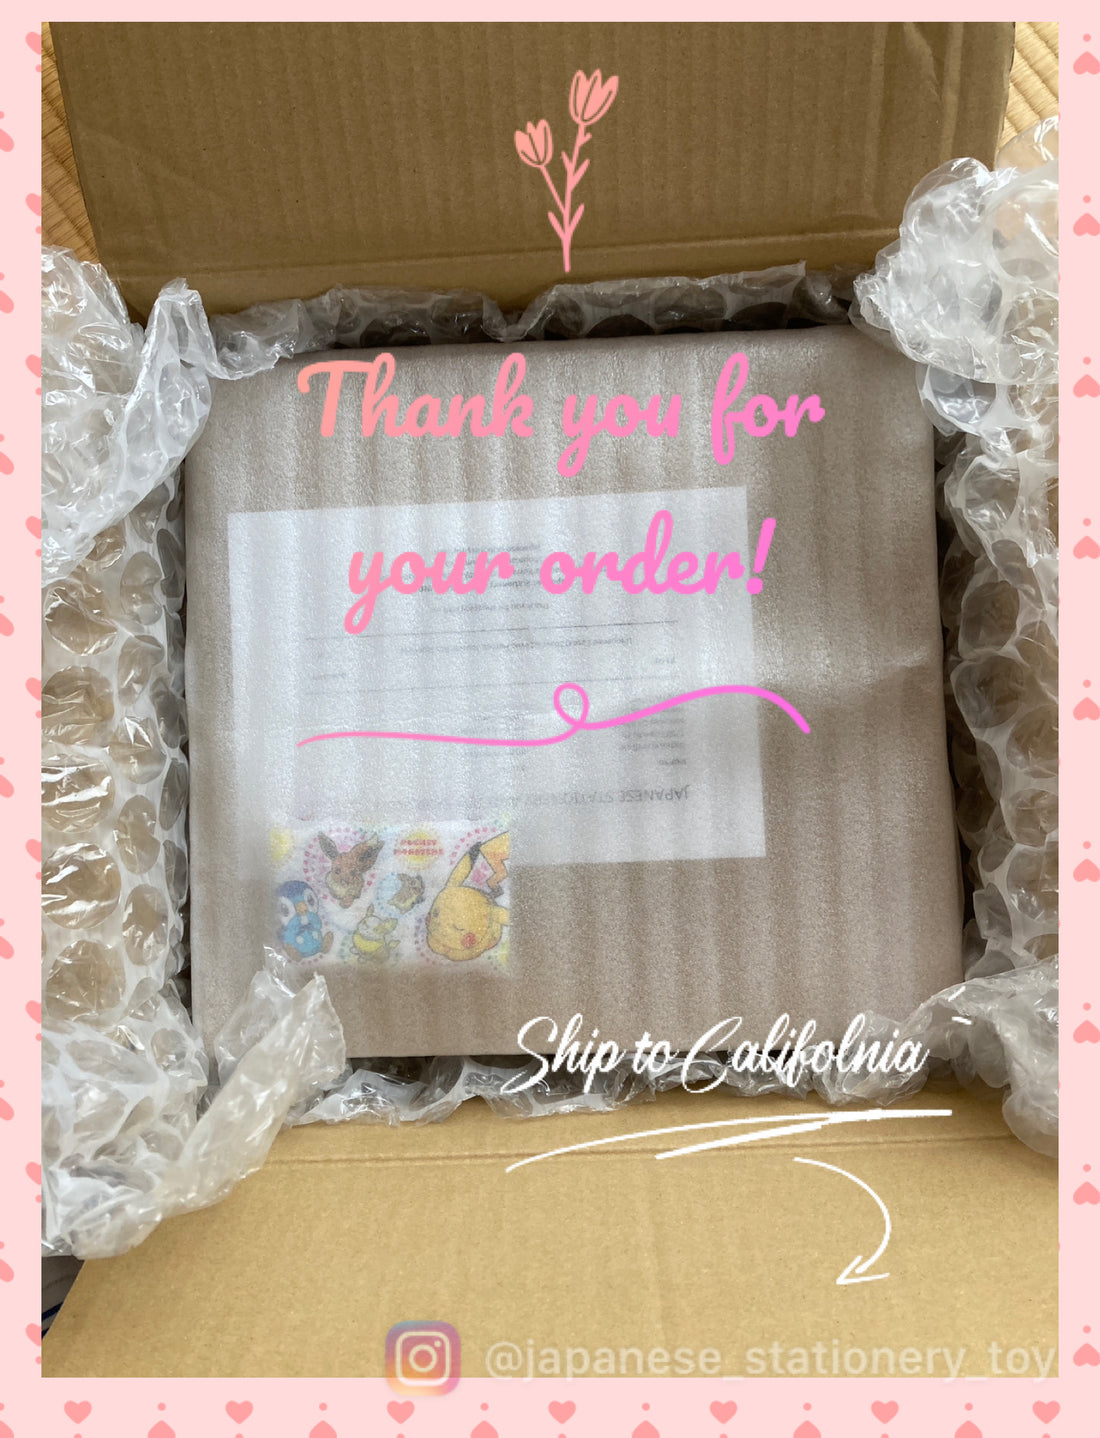 Thank you for your order!!